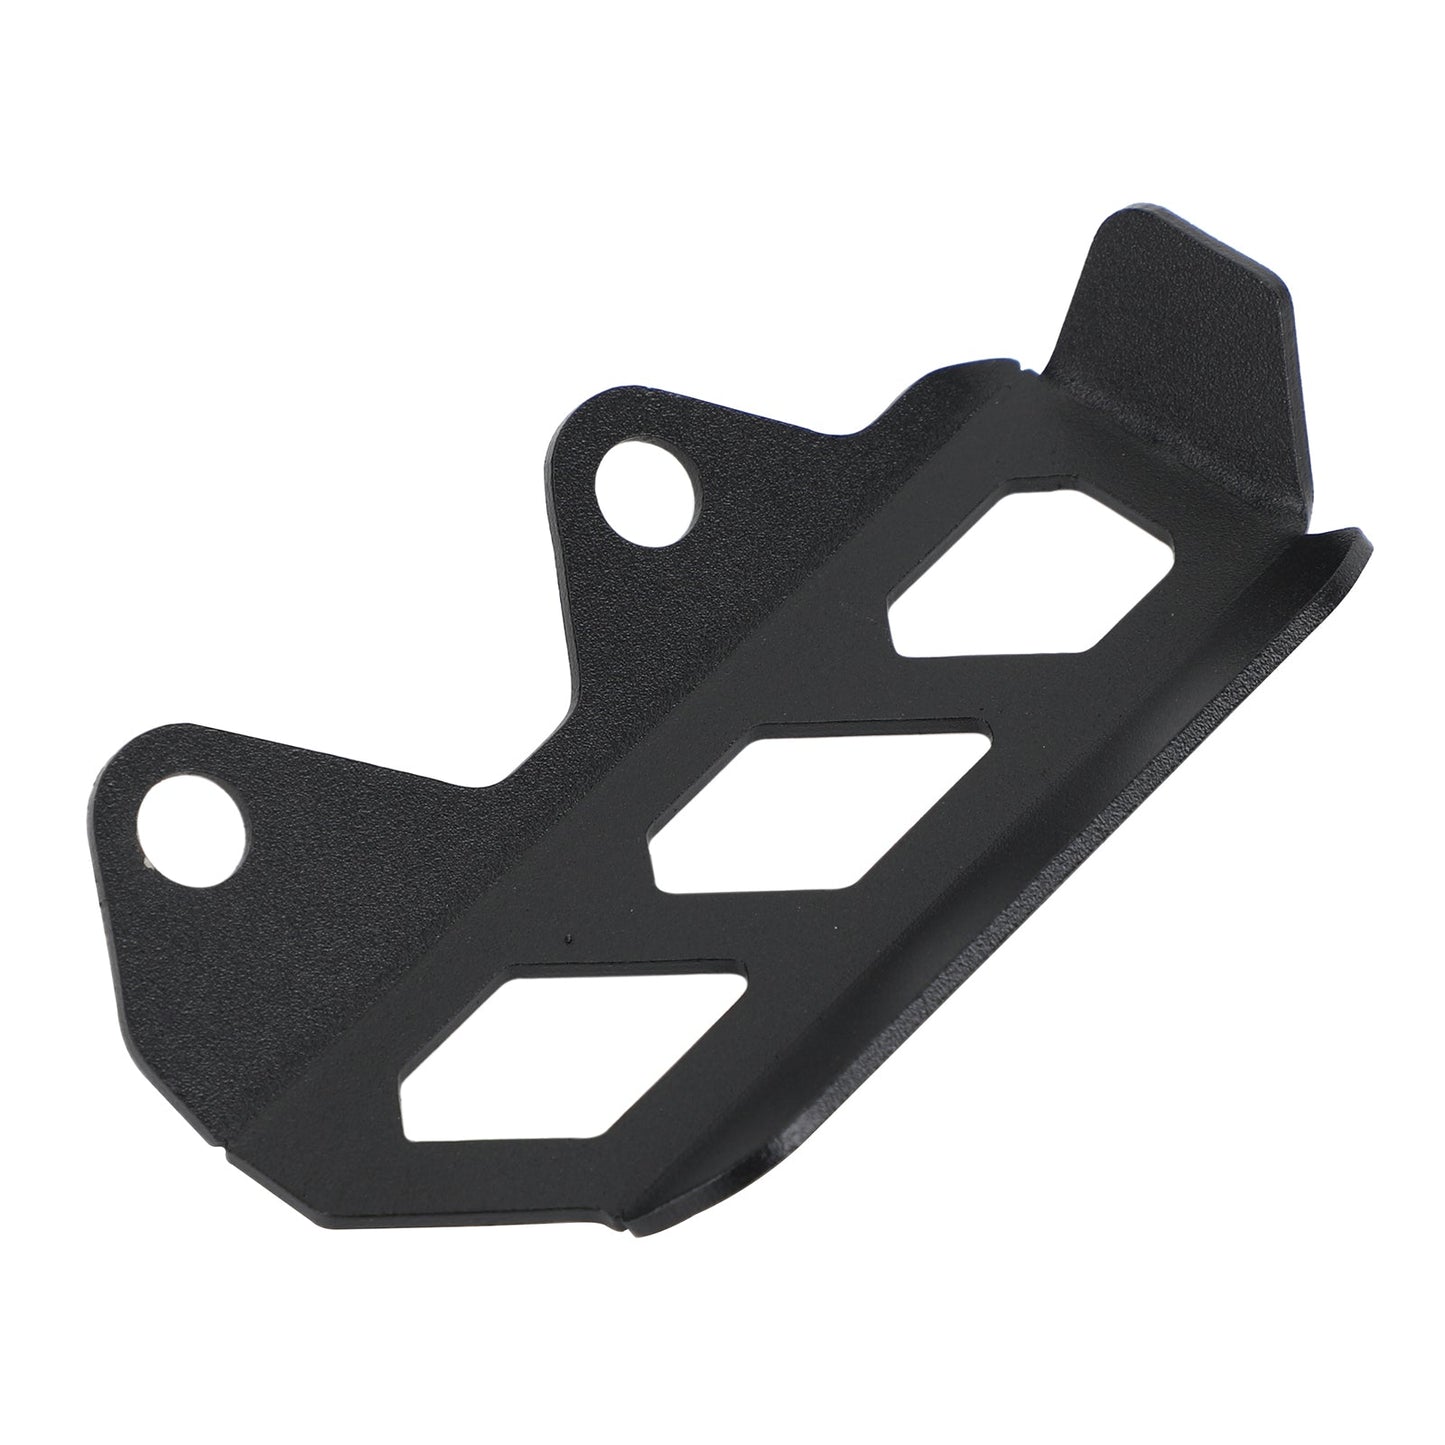 Rear Brake Master Cylinder Guard Cover fit for Yamaha TENERE 700 XTZ700 19-21